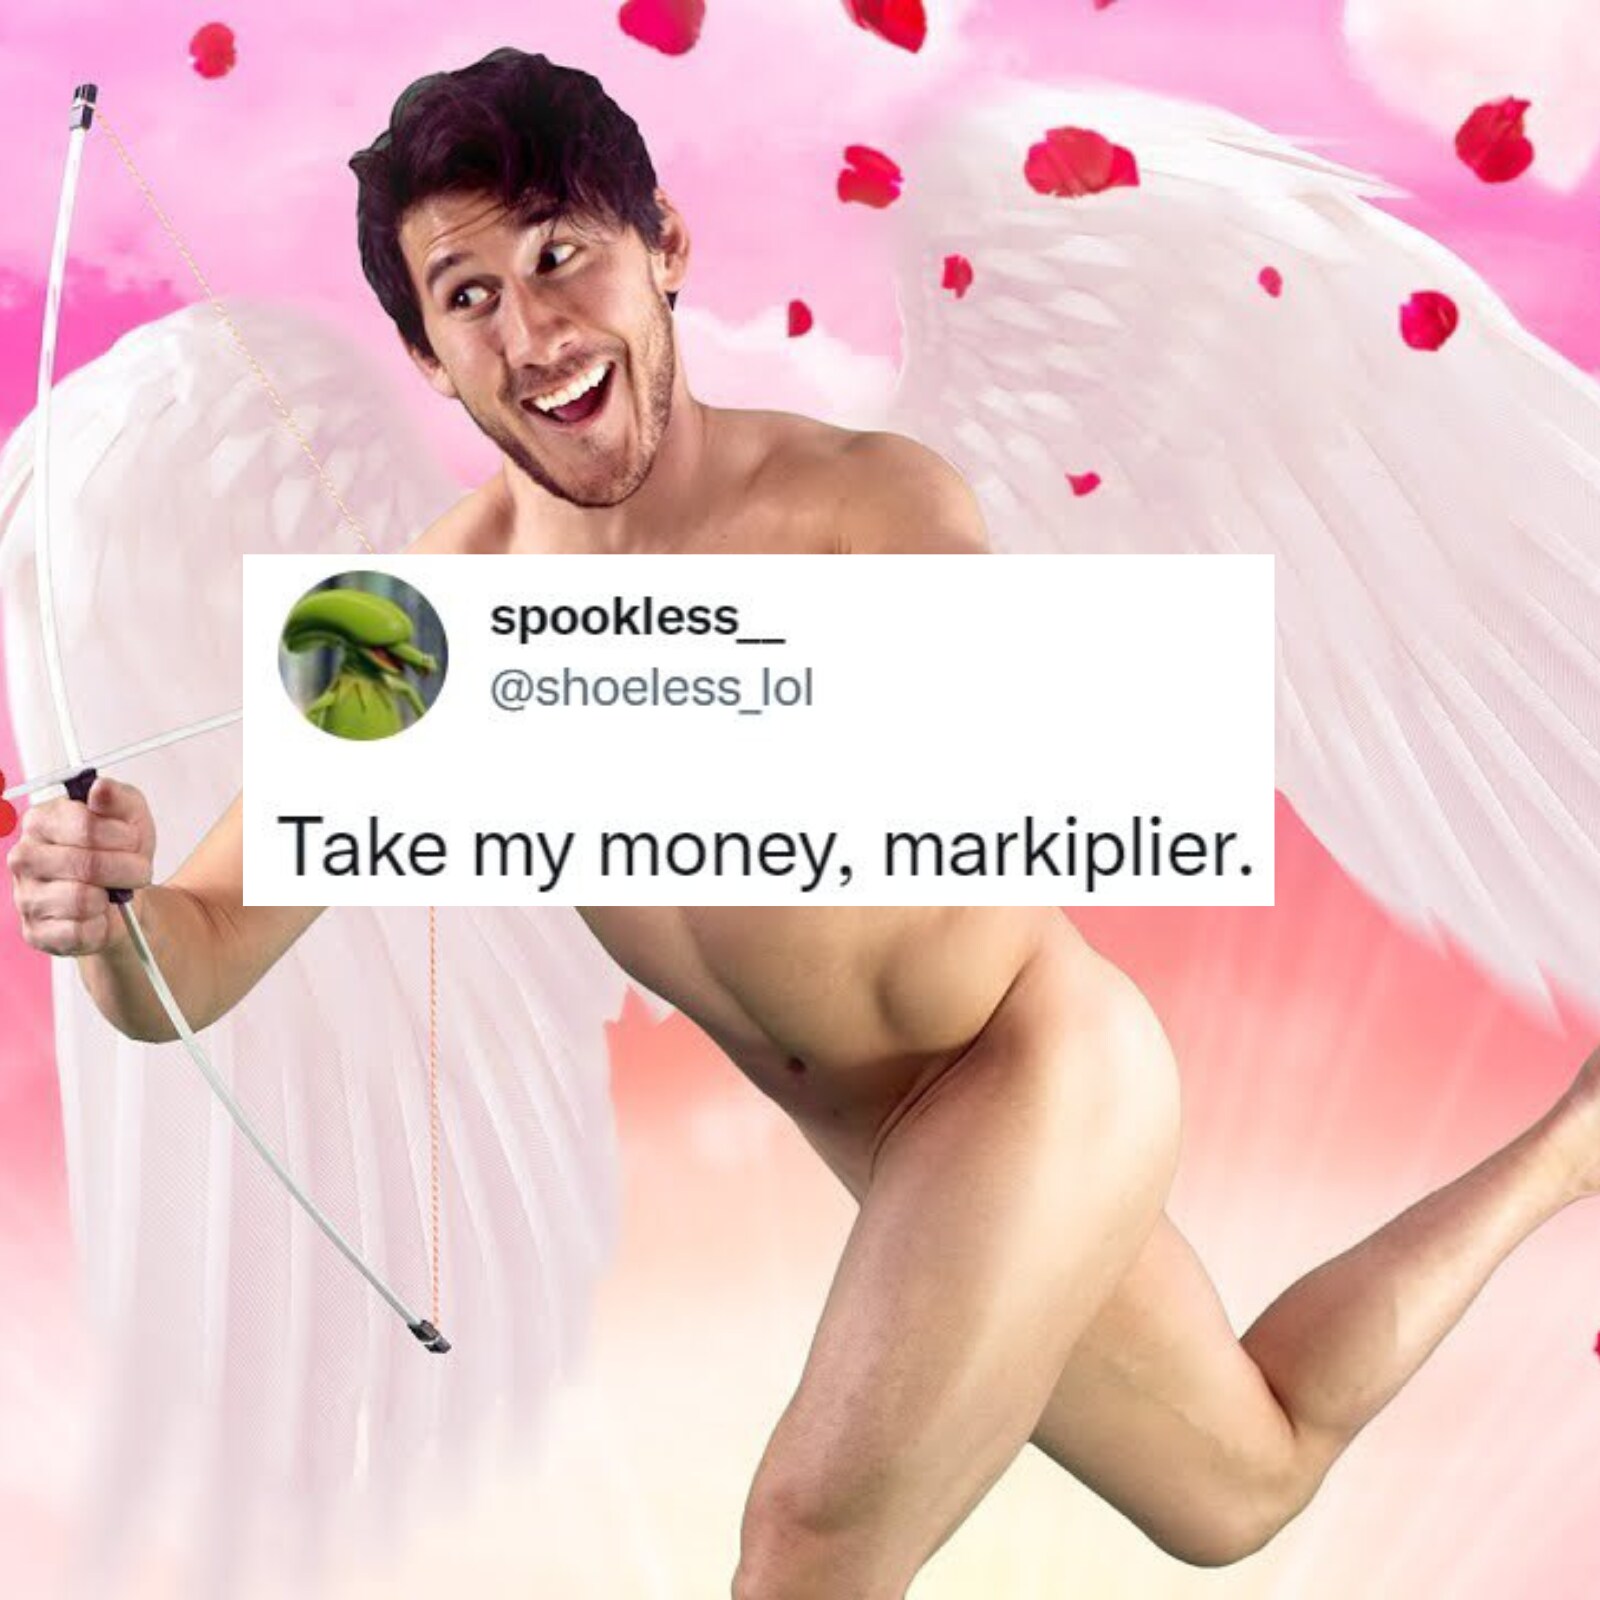 Does markiplier have a only fans